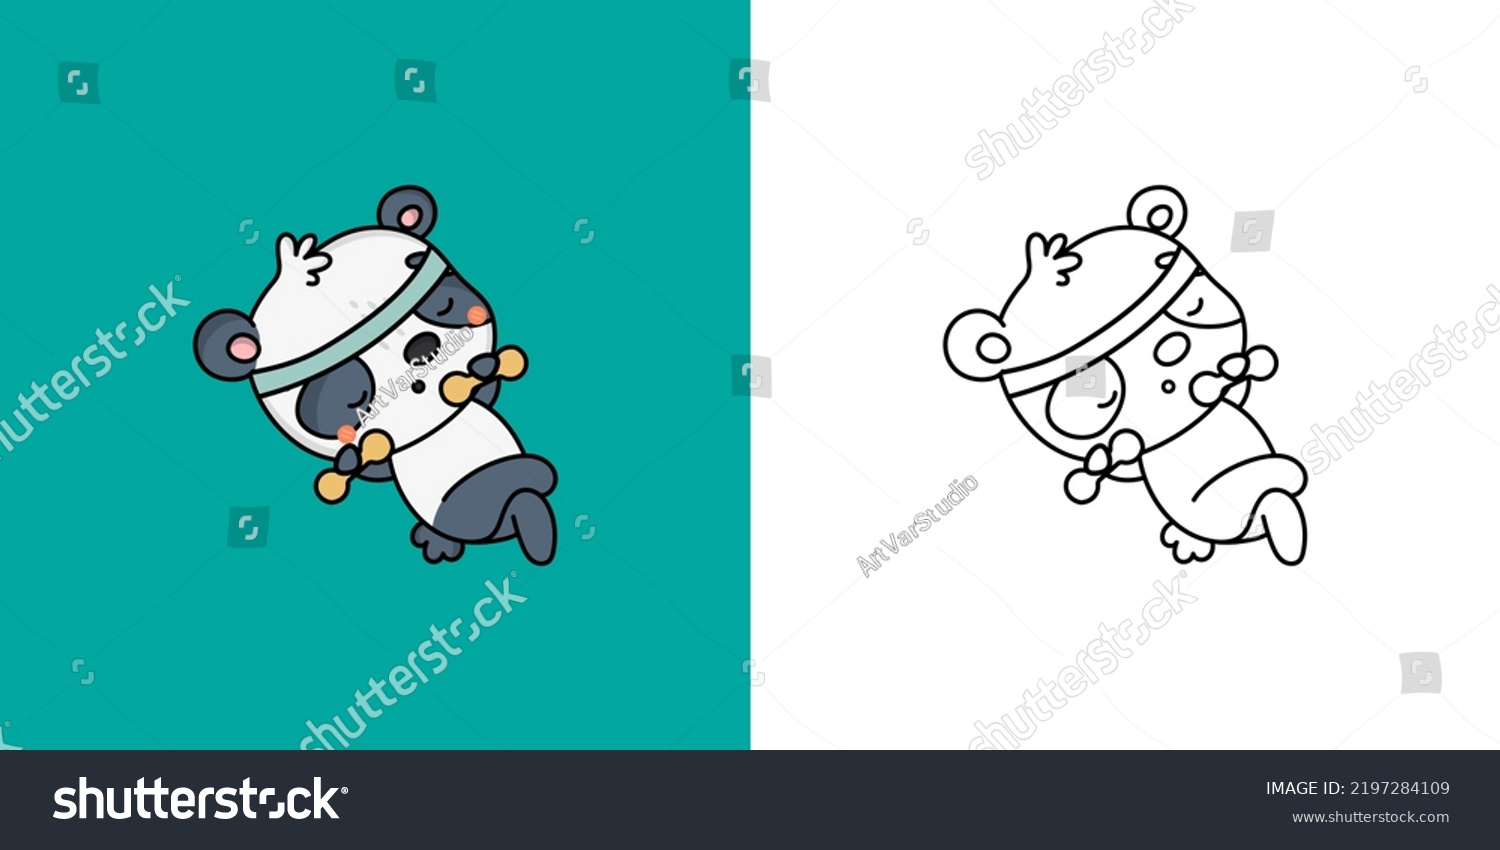 SVG of Clipart Panda Athlete Multicolored and Black and White. Cute Panda Bear Sportsman. Vector Illustration of a Kawaii Animal for Stickers, Baby Shower, Coloring Pages, Prints for Clothes.
 svg